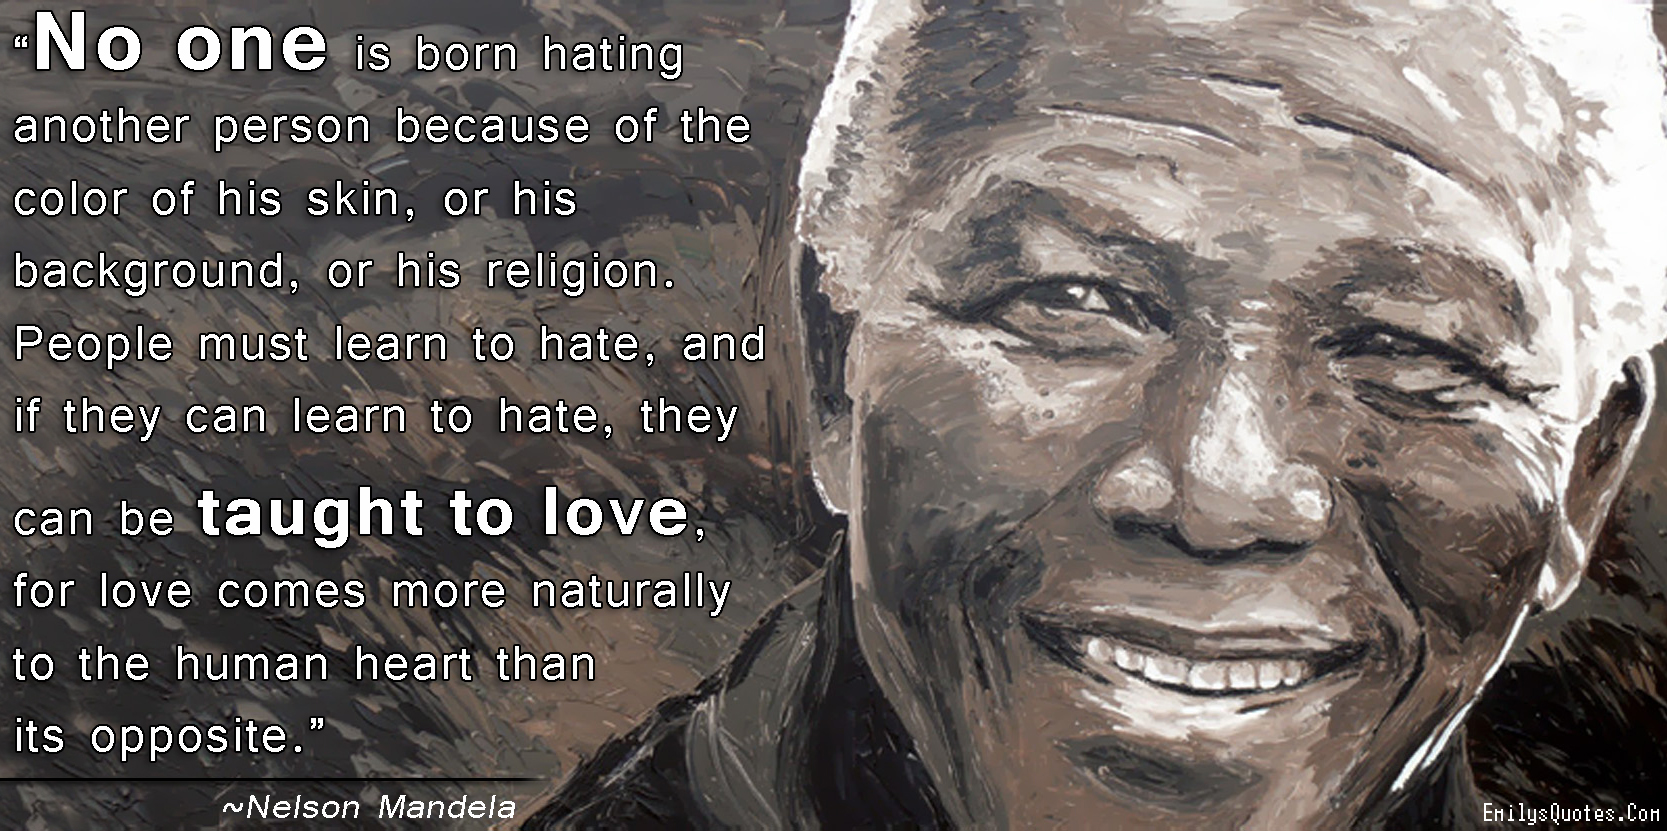 No one is born hating another person because of the color of his skin, or his background, or his religion. People must learn to hate, and if they can learn to hate, they can be taught to love, for love comes more naturally to the human heart than its opposite